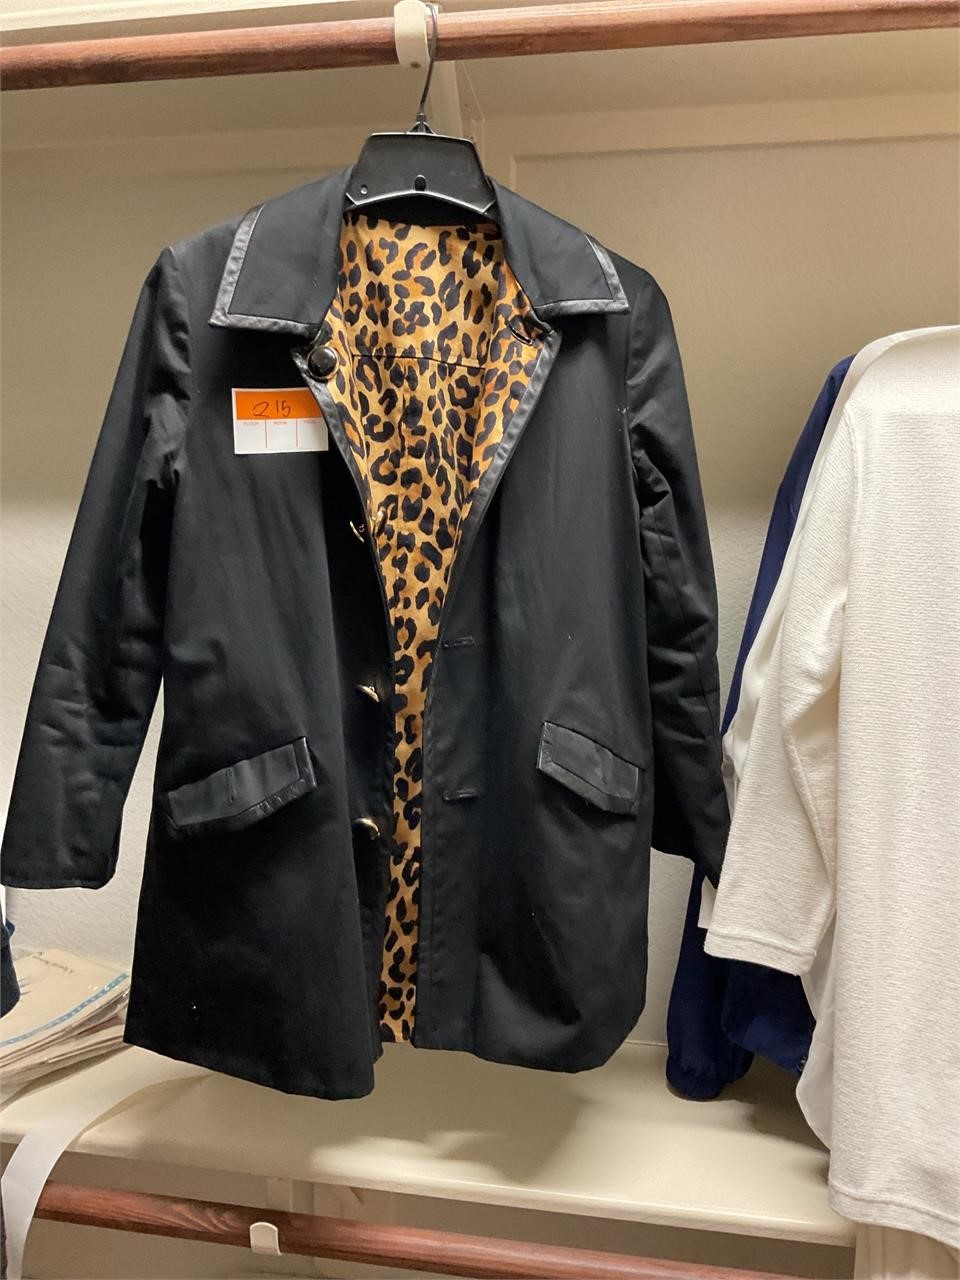 Women’s jacket and clothes